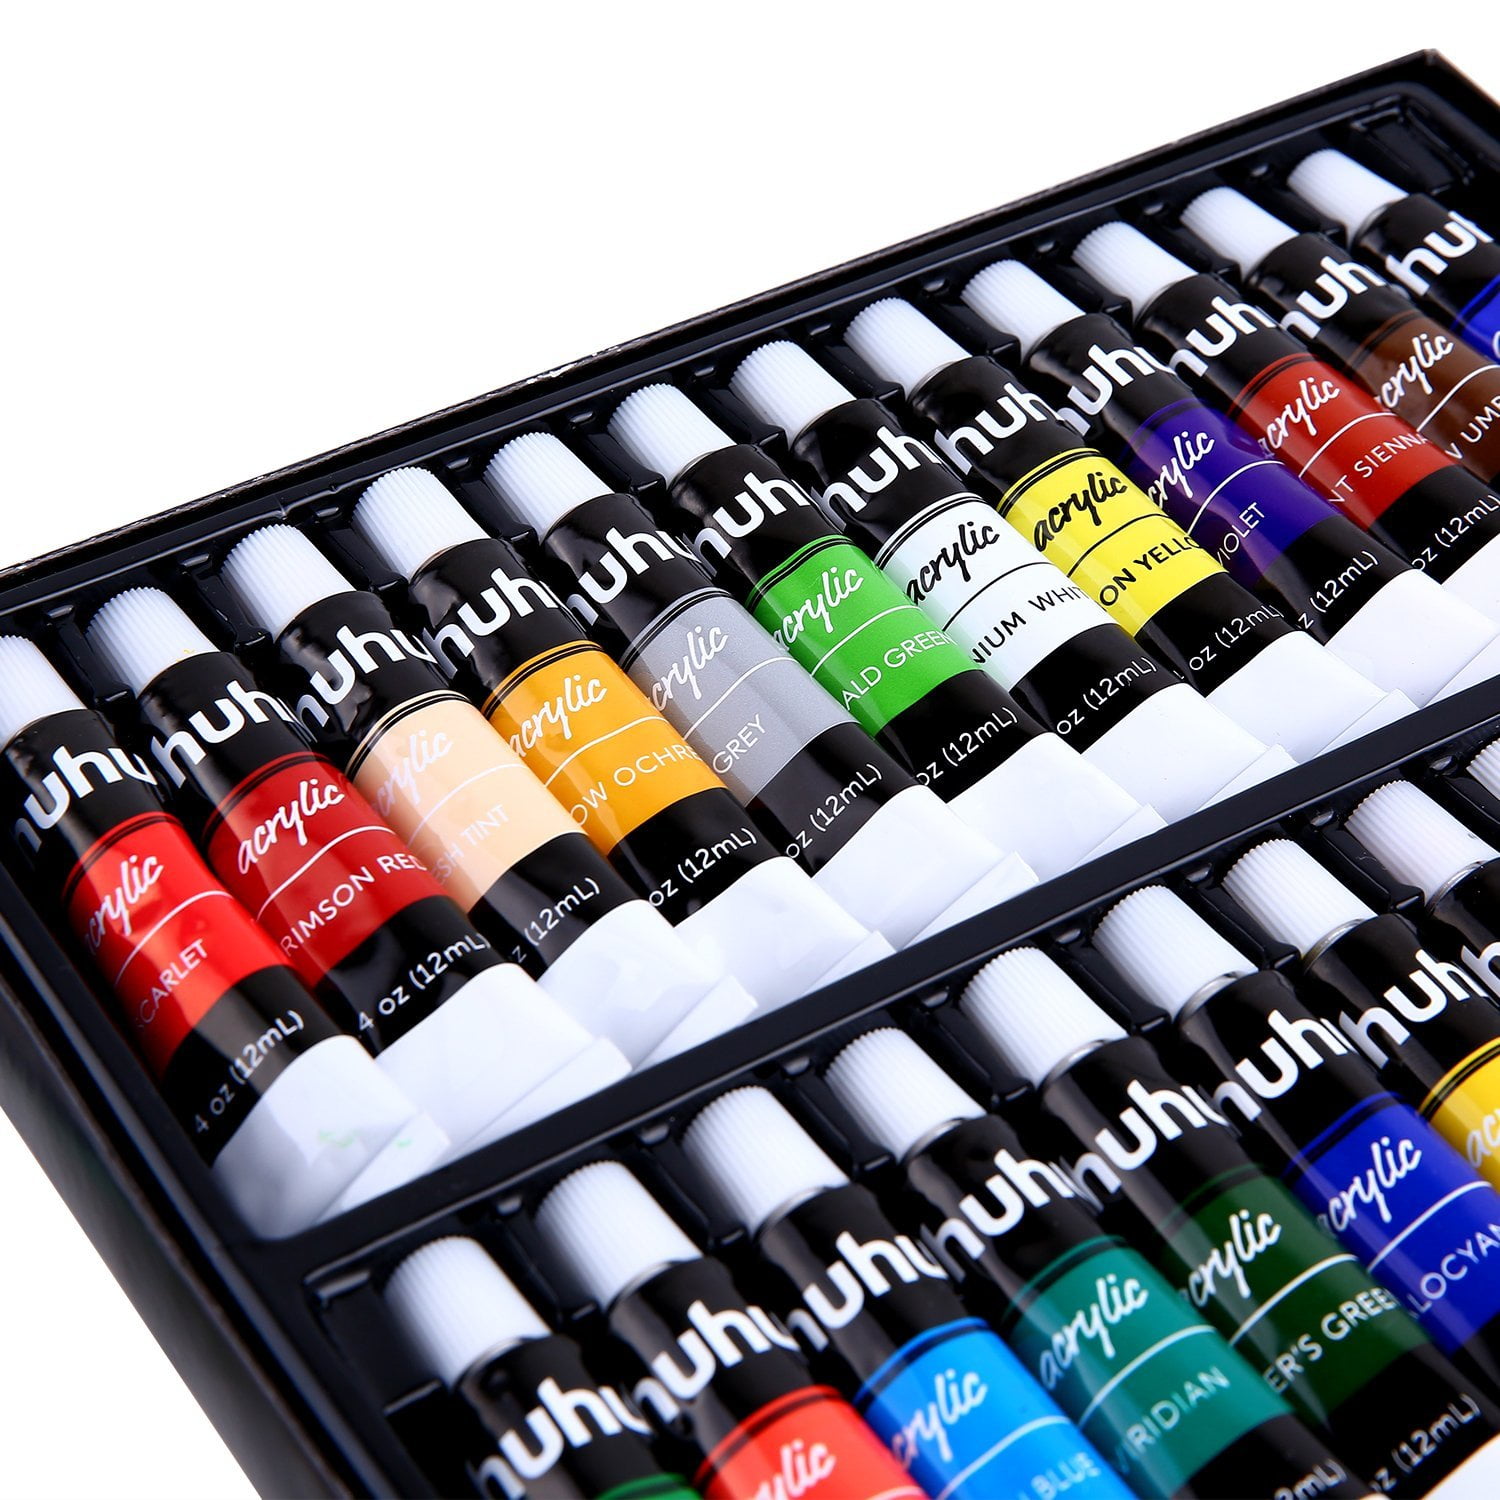 Acrylic Paint Set - Artist Quality Paints for Painting Canvas, Wood, Clay,  Fabric, Nail Art, Ceramic & Crafts - 12 x 12ml Heavy Body Colors - Rich  Pigments - Professional Supplies by MyArtscape - Gourd Depot